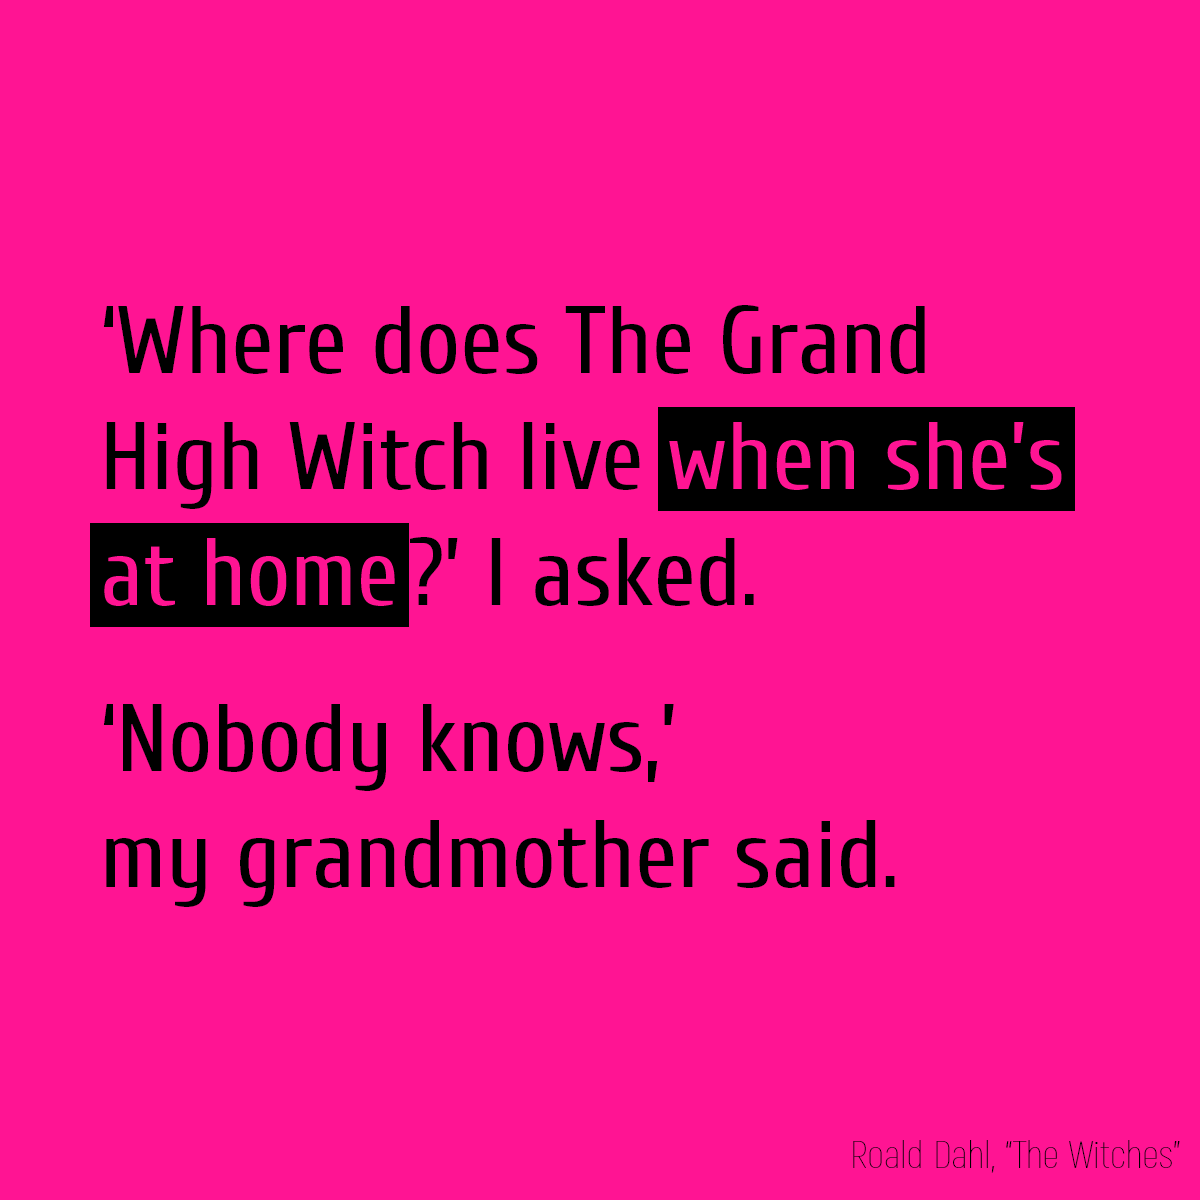 ‘Where does The Grand High Witch live **when she’s at home**?’ I asked. ‘Nobody knows,’ my grandmother said.